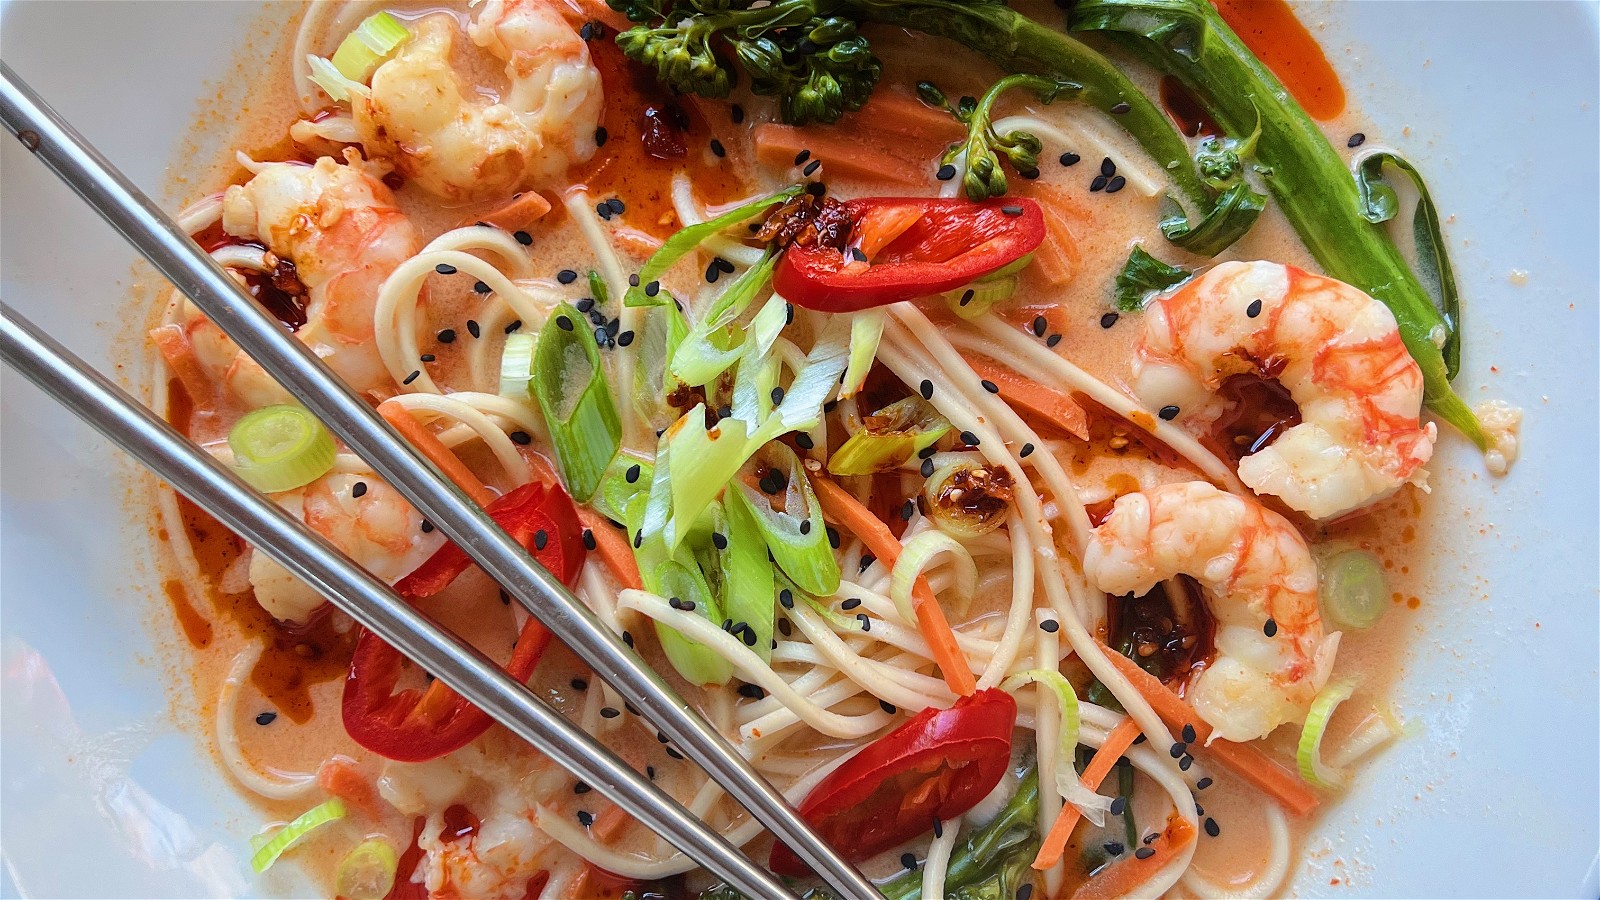 Image of Spicy Thai Prawn Curry with Noodles